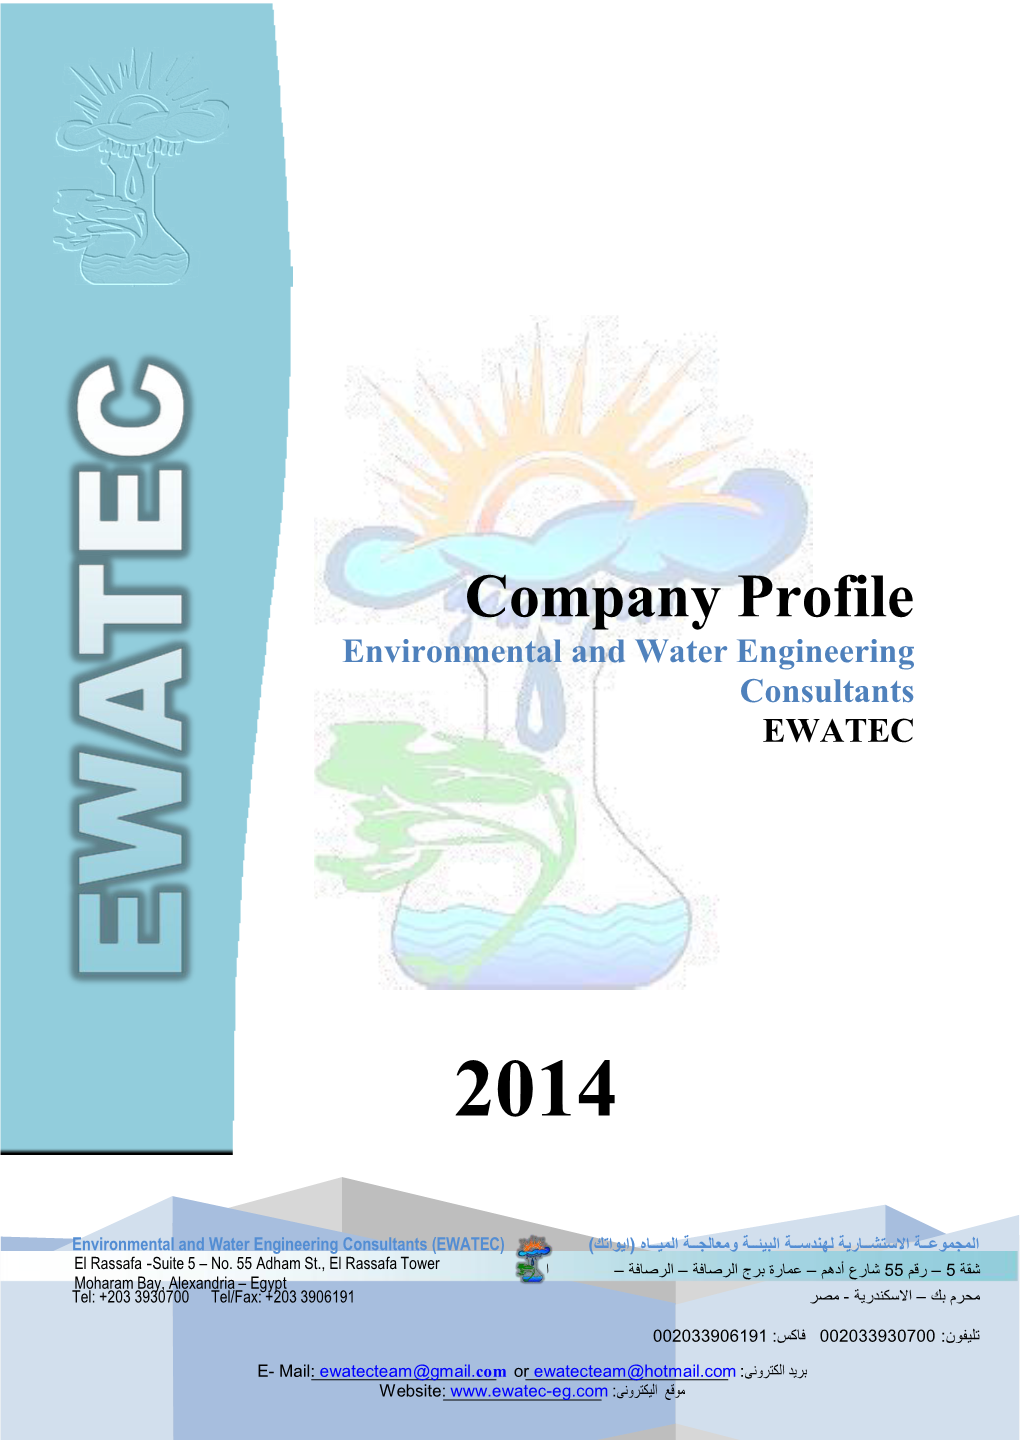 Company Profile Environmental and Water Engineering Consultants EWATEC